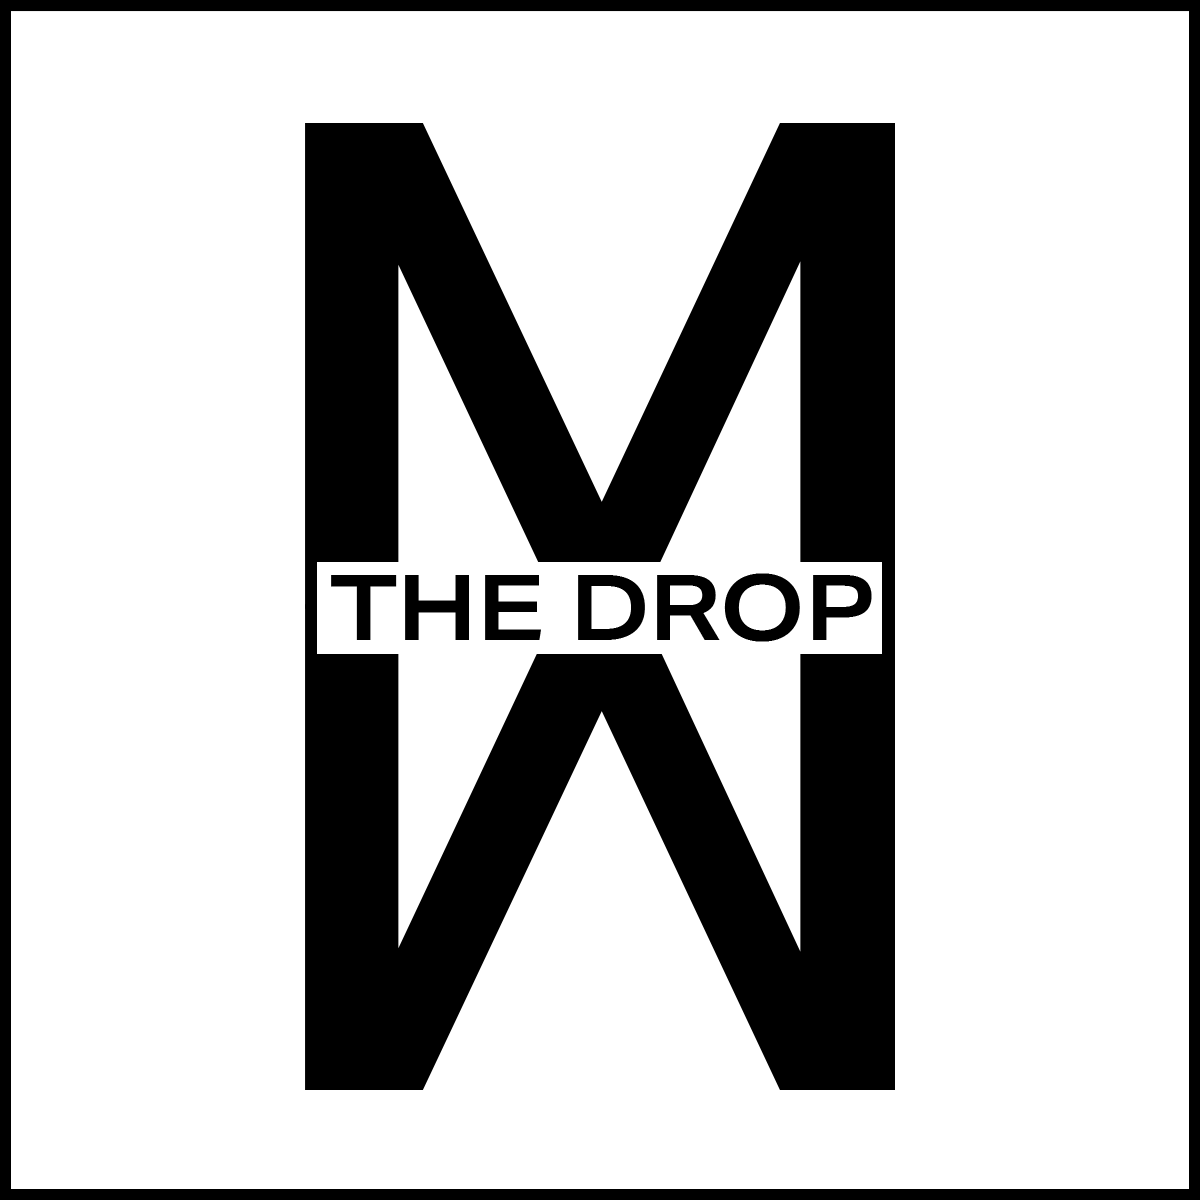 The Drop x SyncMarket for Shopify